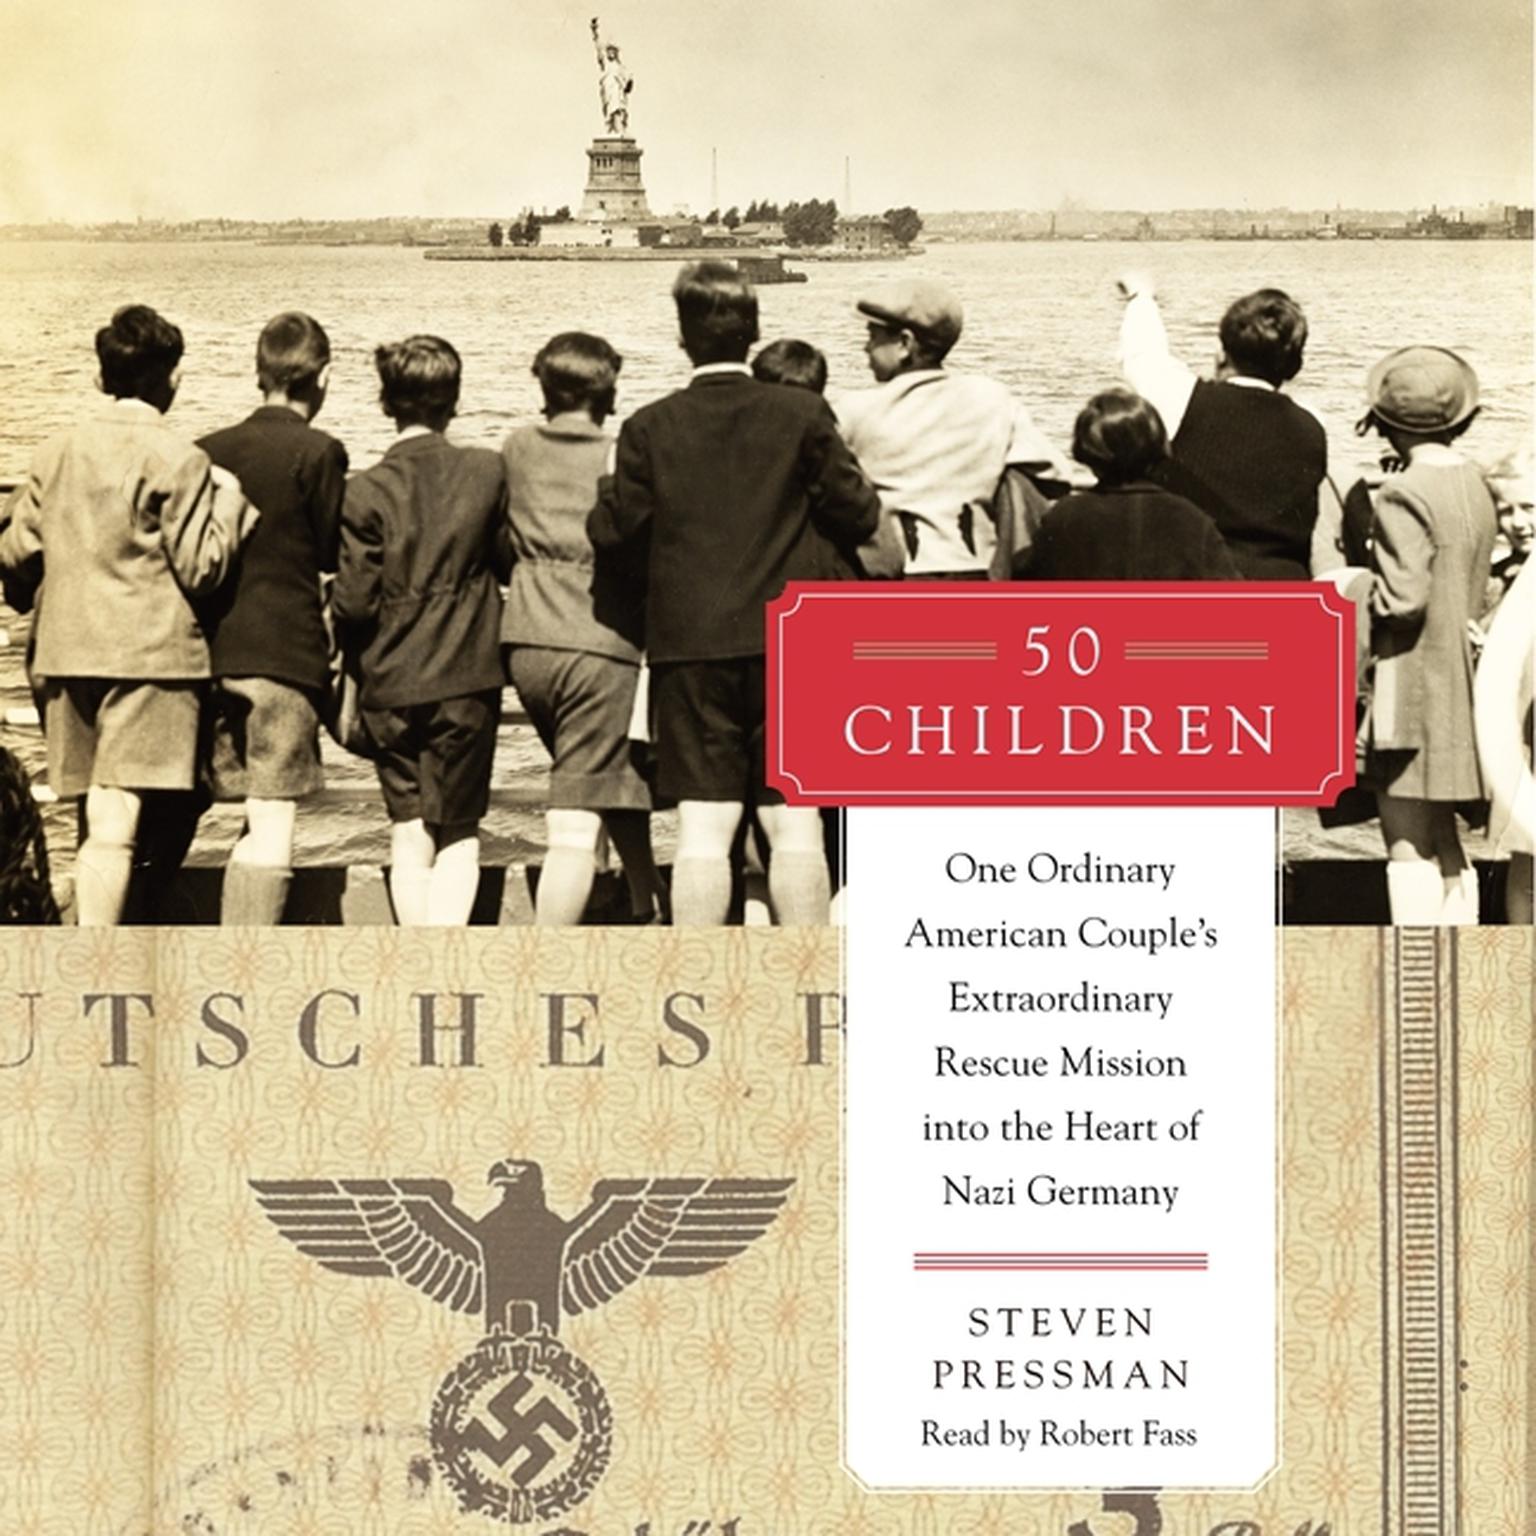 50 Children: One Ordinary American Couples Extraordinary Rescue Mission into the Heart of Nazi Germany Audiobook, by Steven Pressman